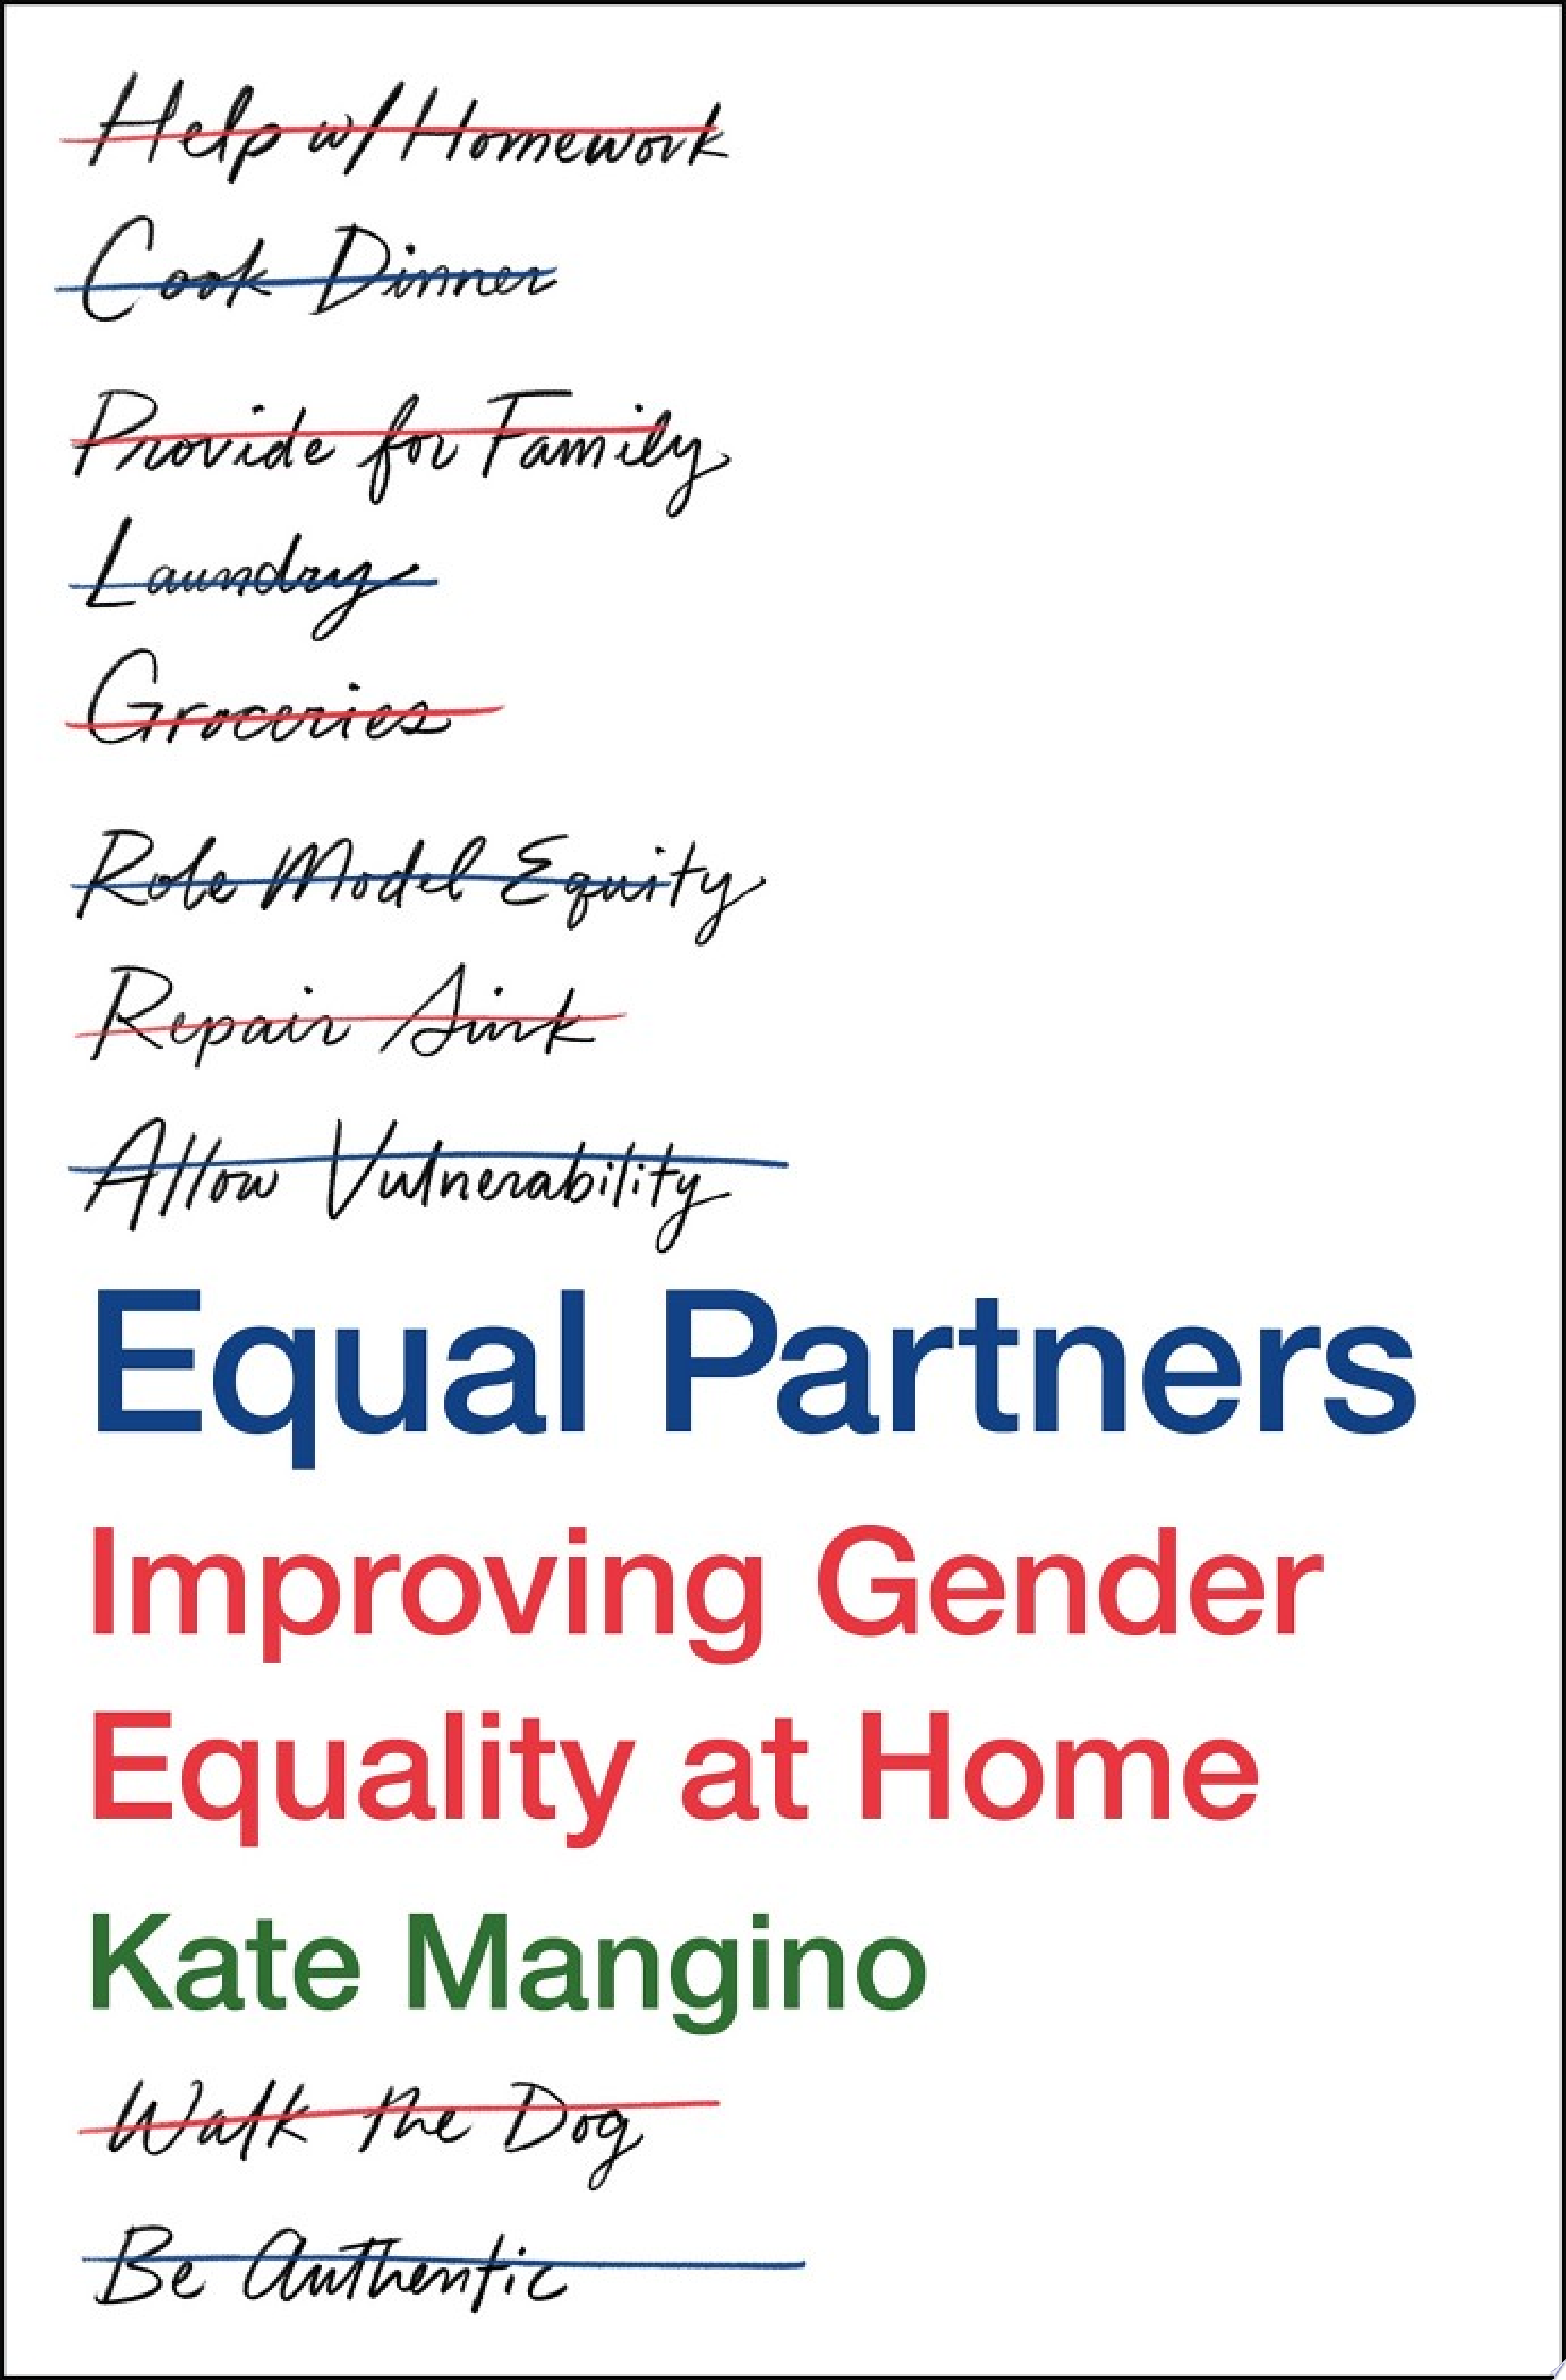 Image for "Equal Partners"